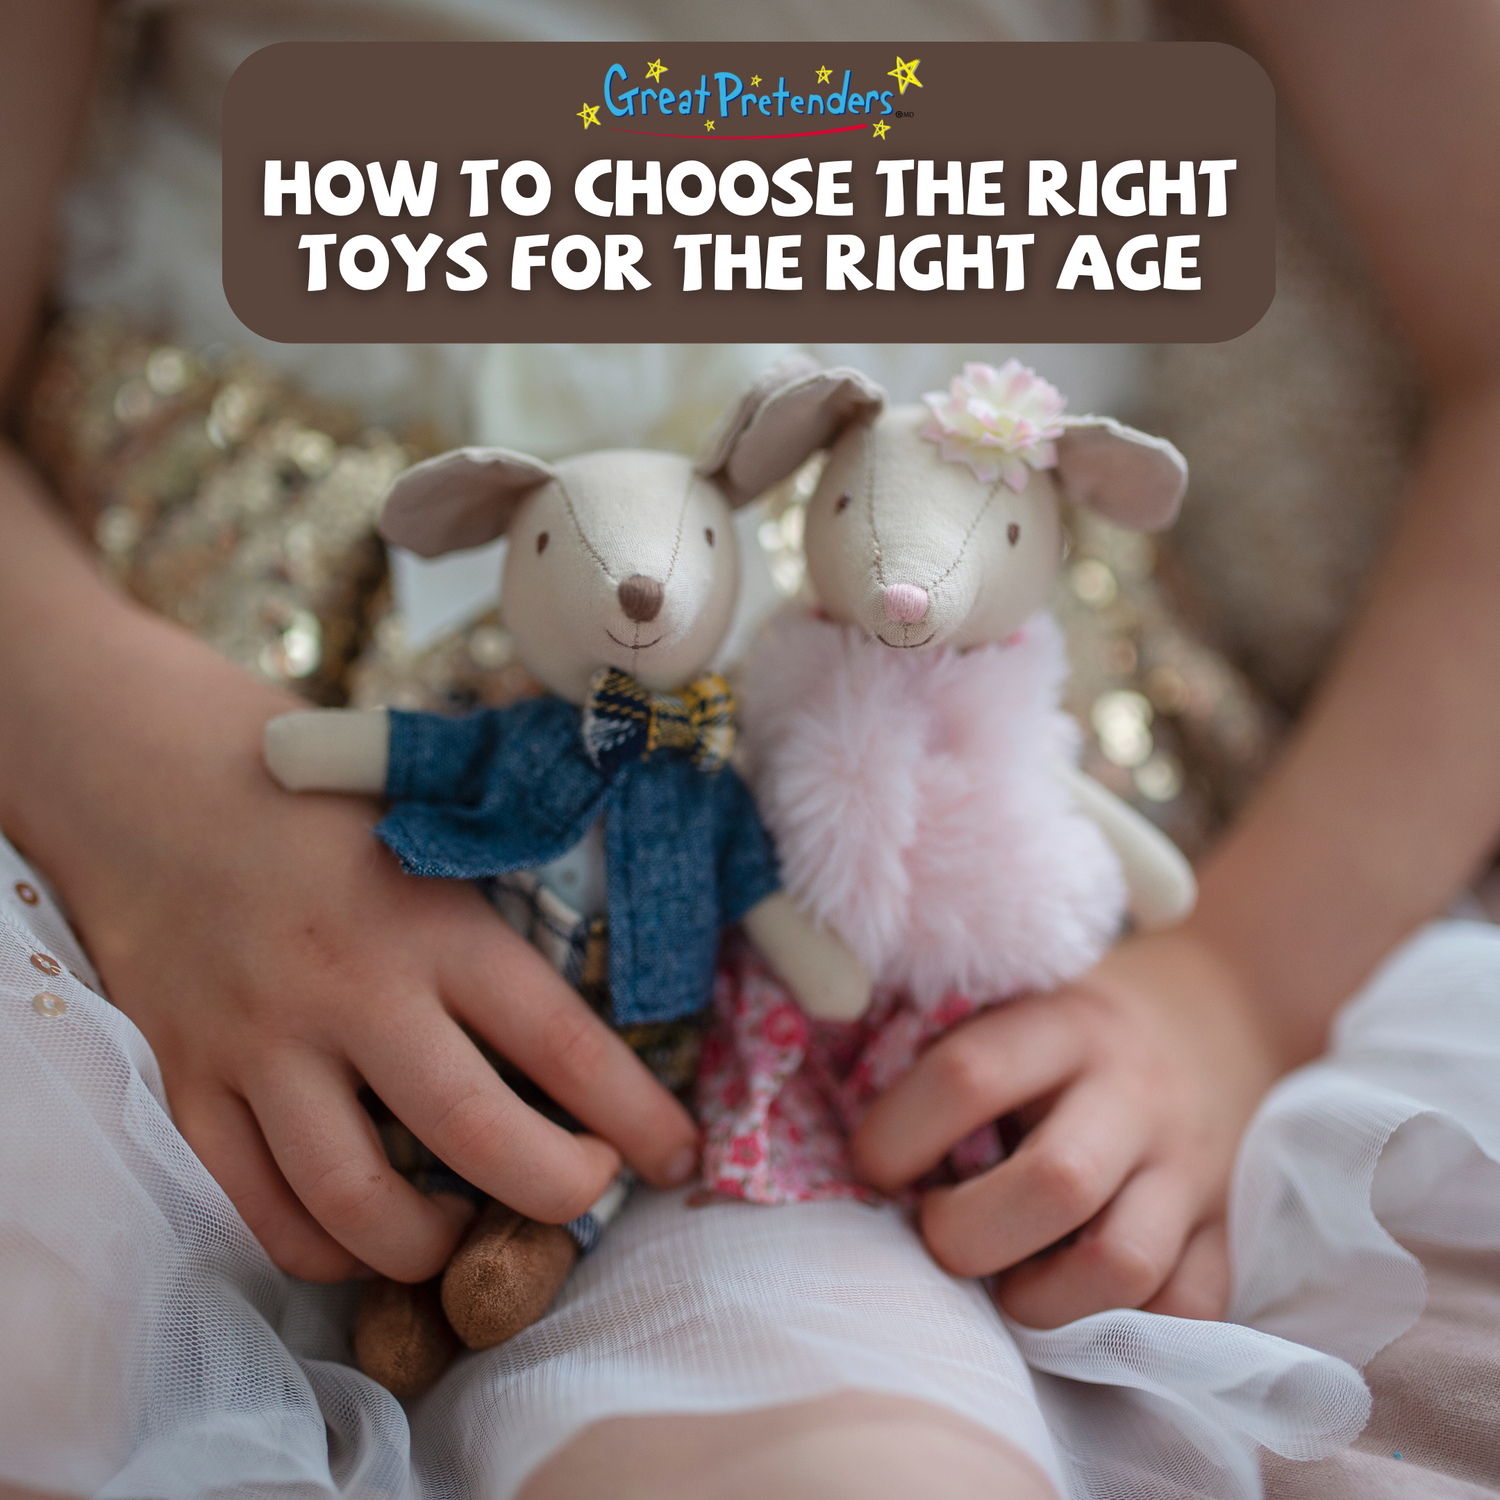 How to Choose the Right Toys for the Right Age